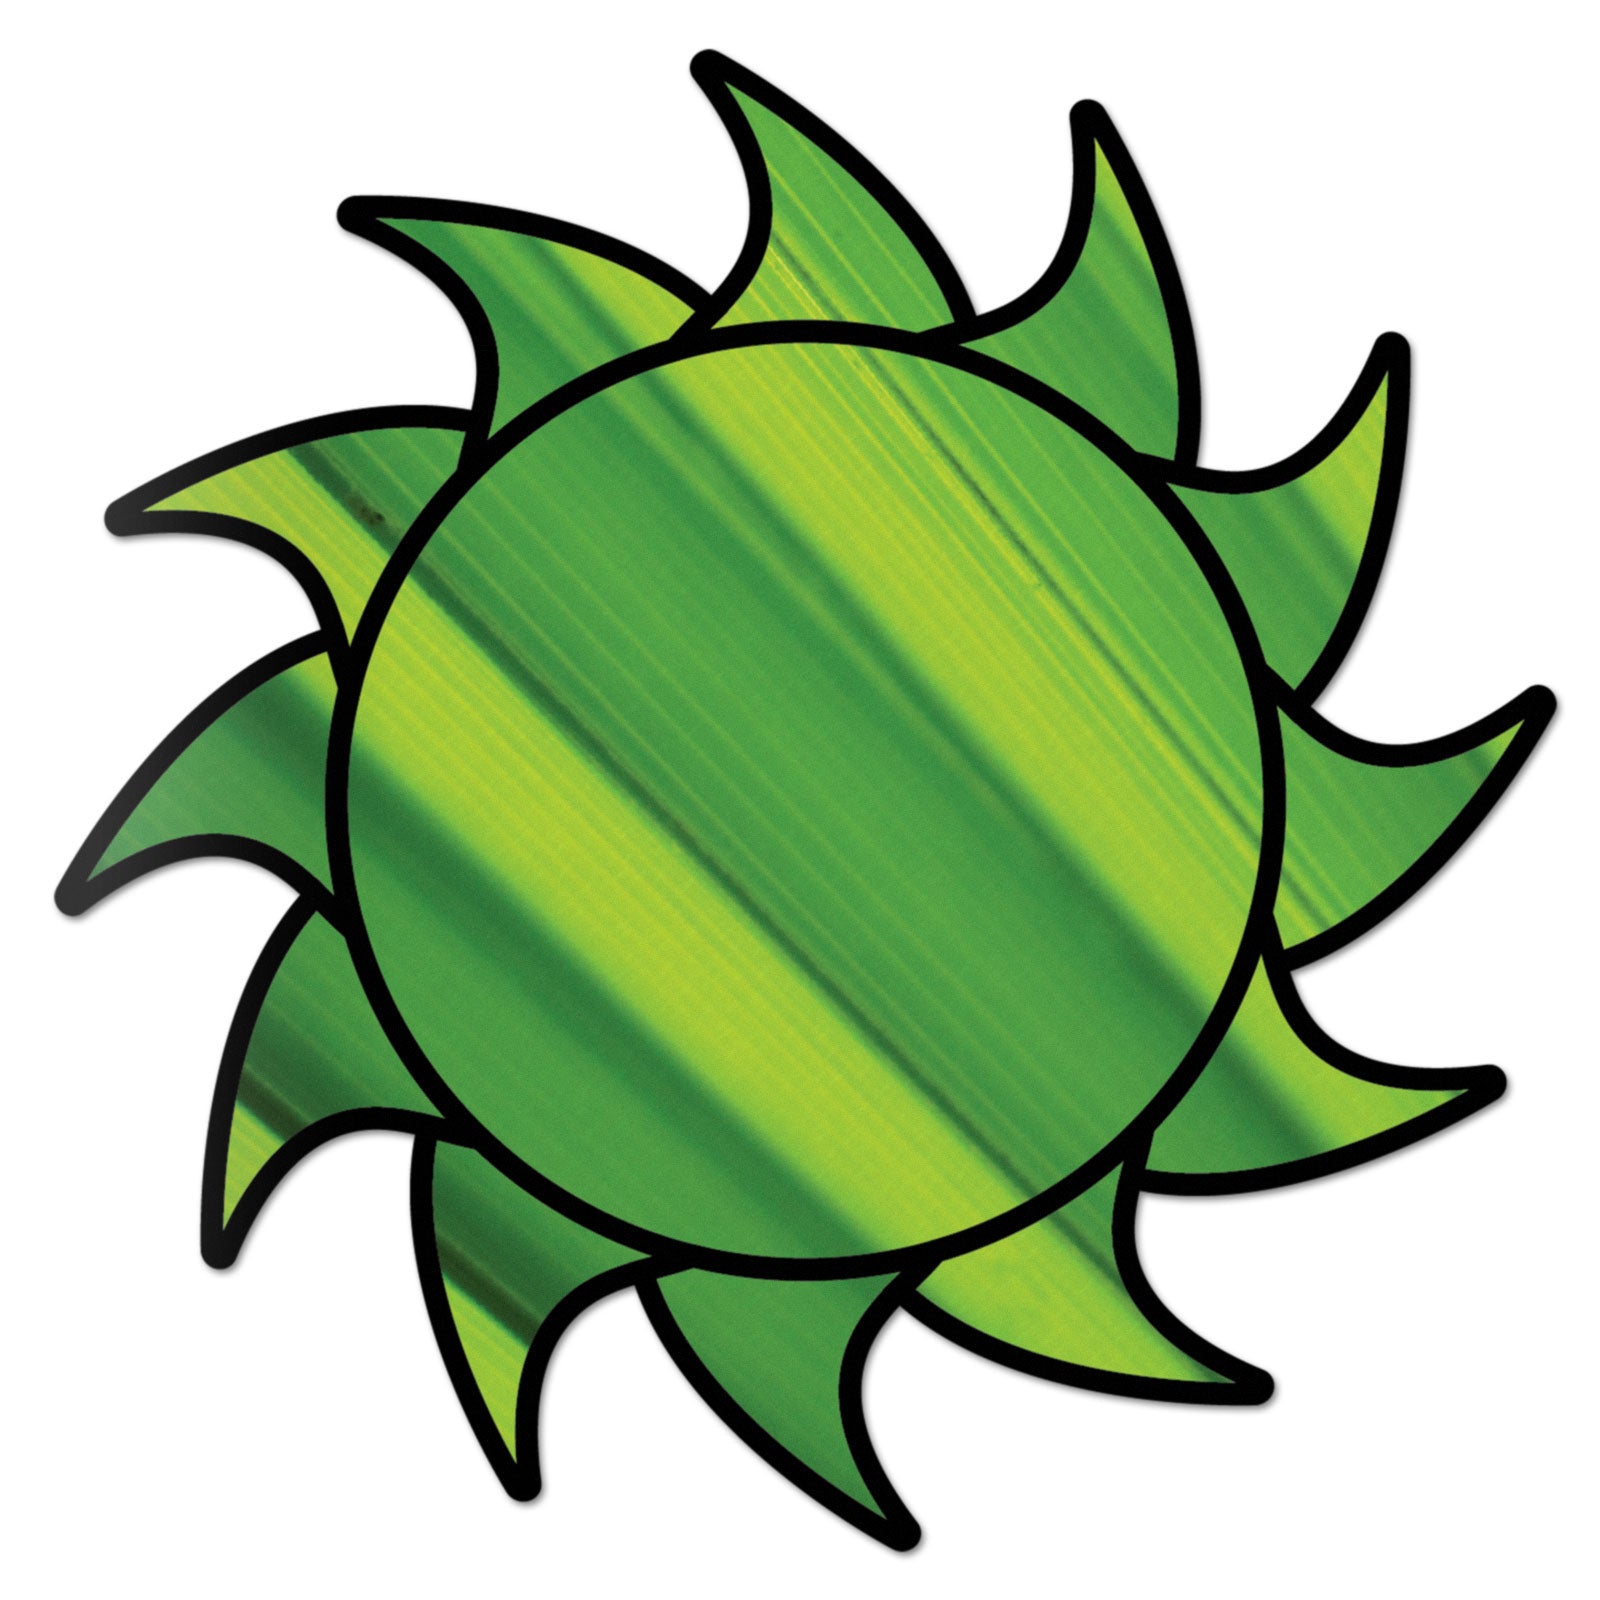 Sun Decal Green Burst Sticker Vinyl Rear Window Car Truck Large Sun Solar Wall Water and Fade Resistant 6 Inches